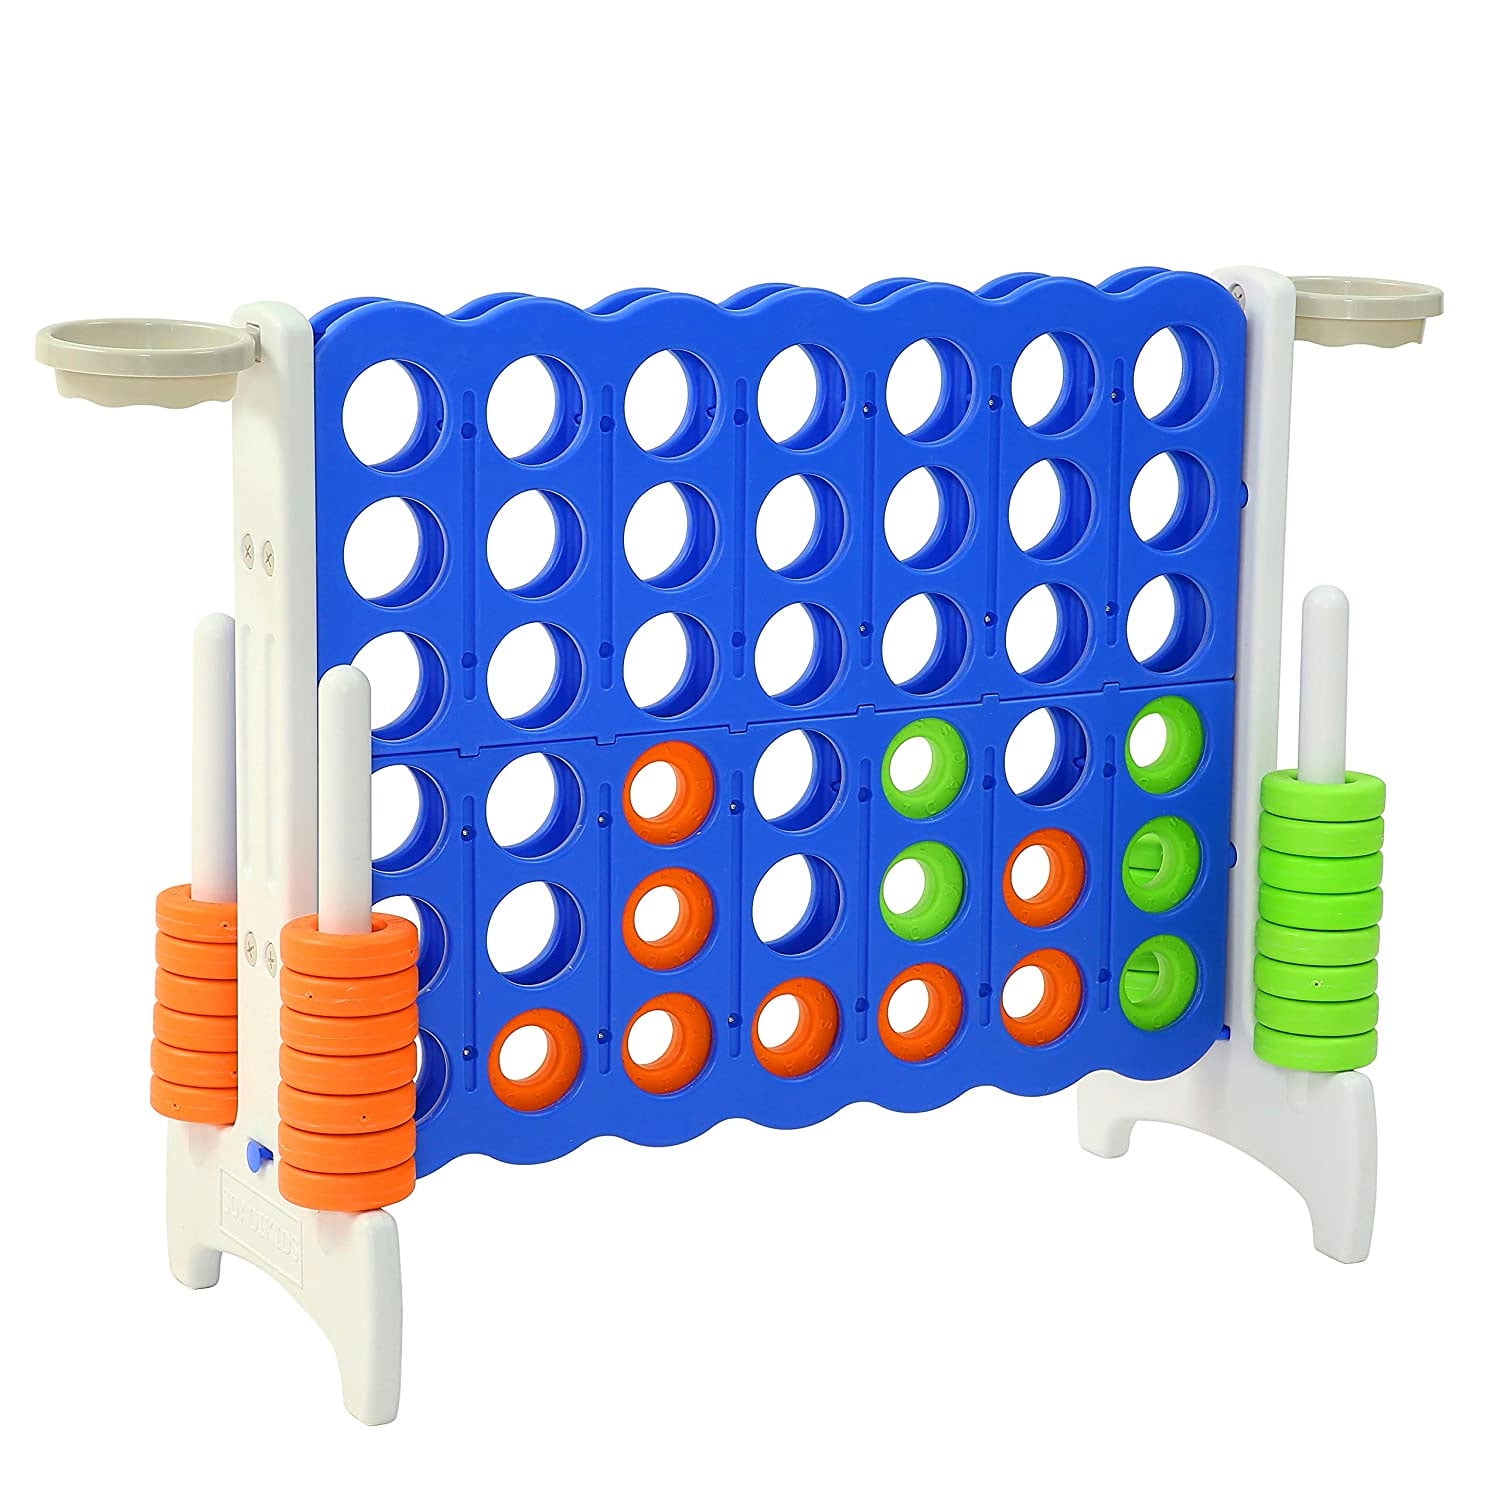 GIANT CONNECT FOUR 4 IN A ROW FAMILY PARTY GAME INDOOR OUTDOOR GARDEN TOY 101311 